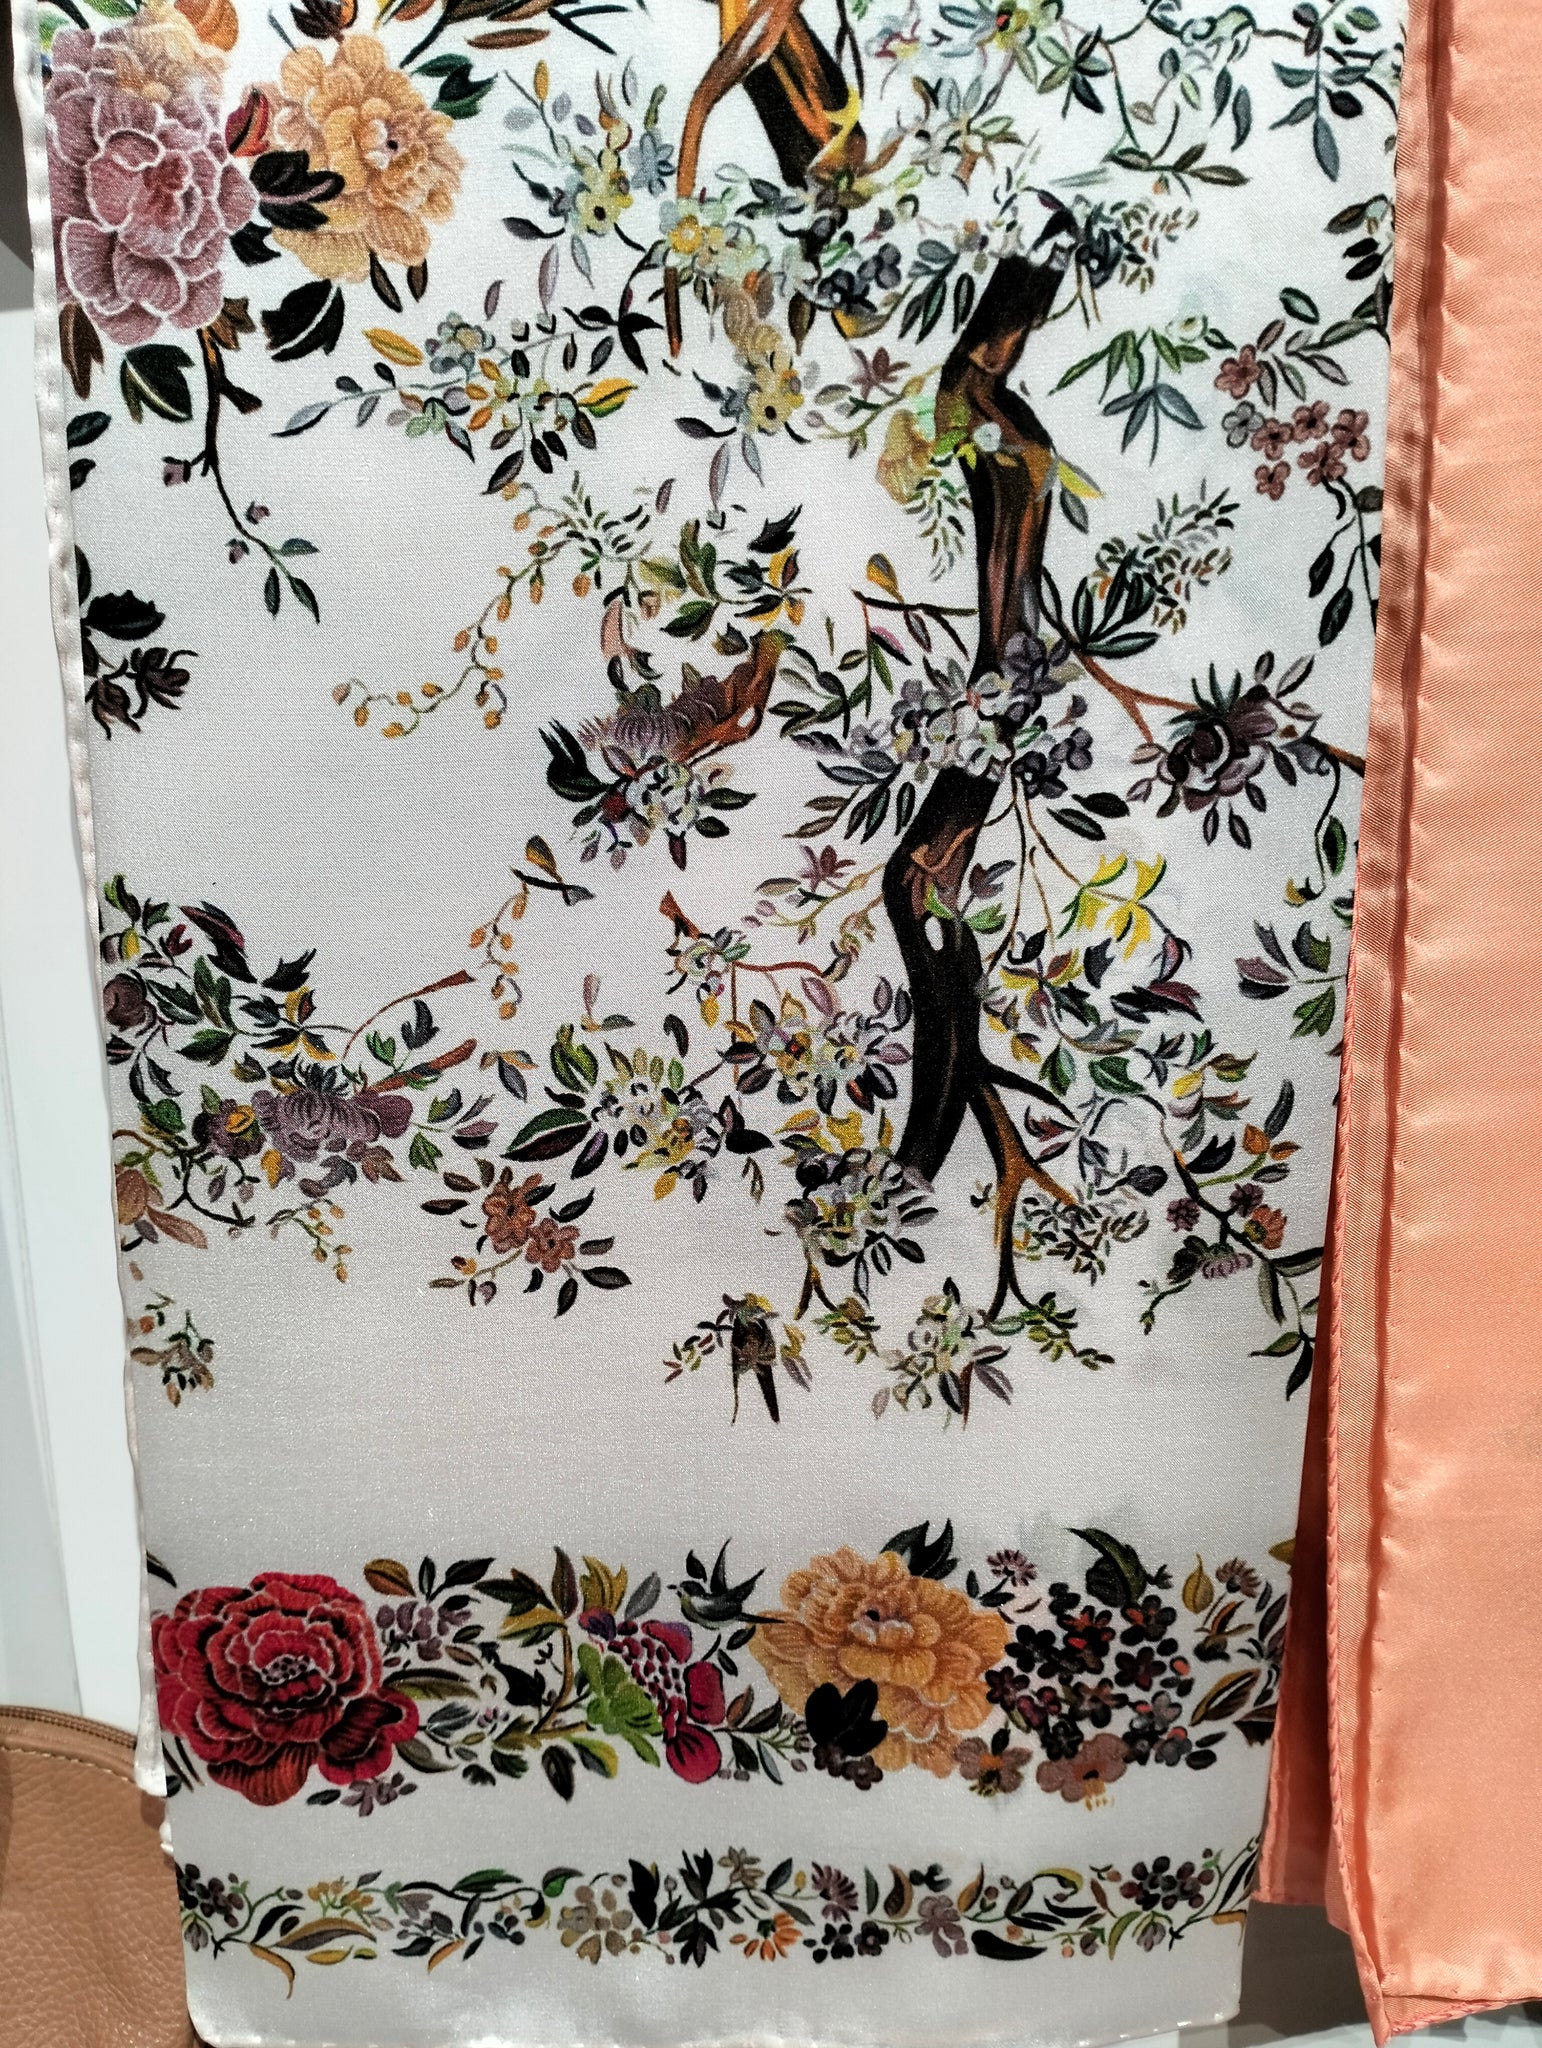 Foulard bianco - rose fiori rami - white headscarf with roses flowers branches